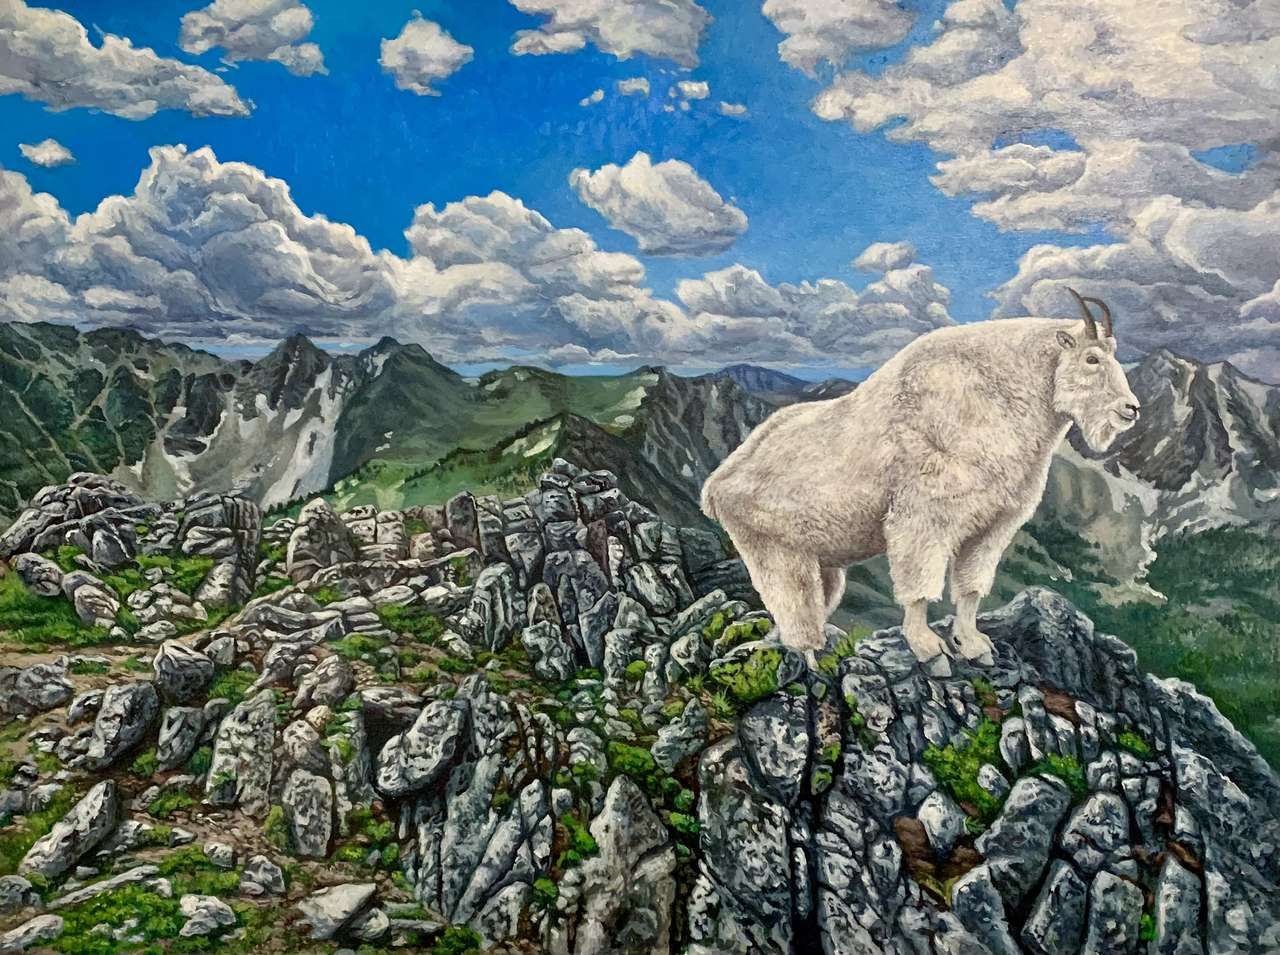 Goat puzzle puzzle online from photo